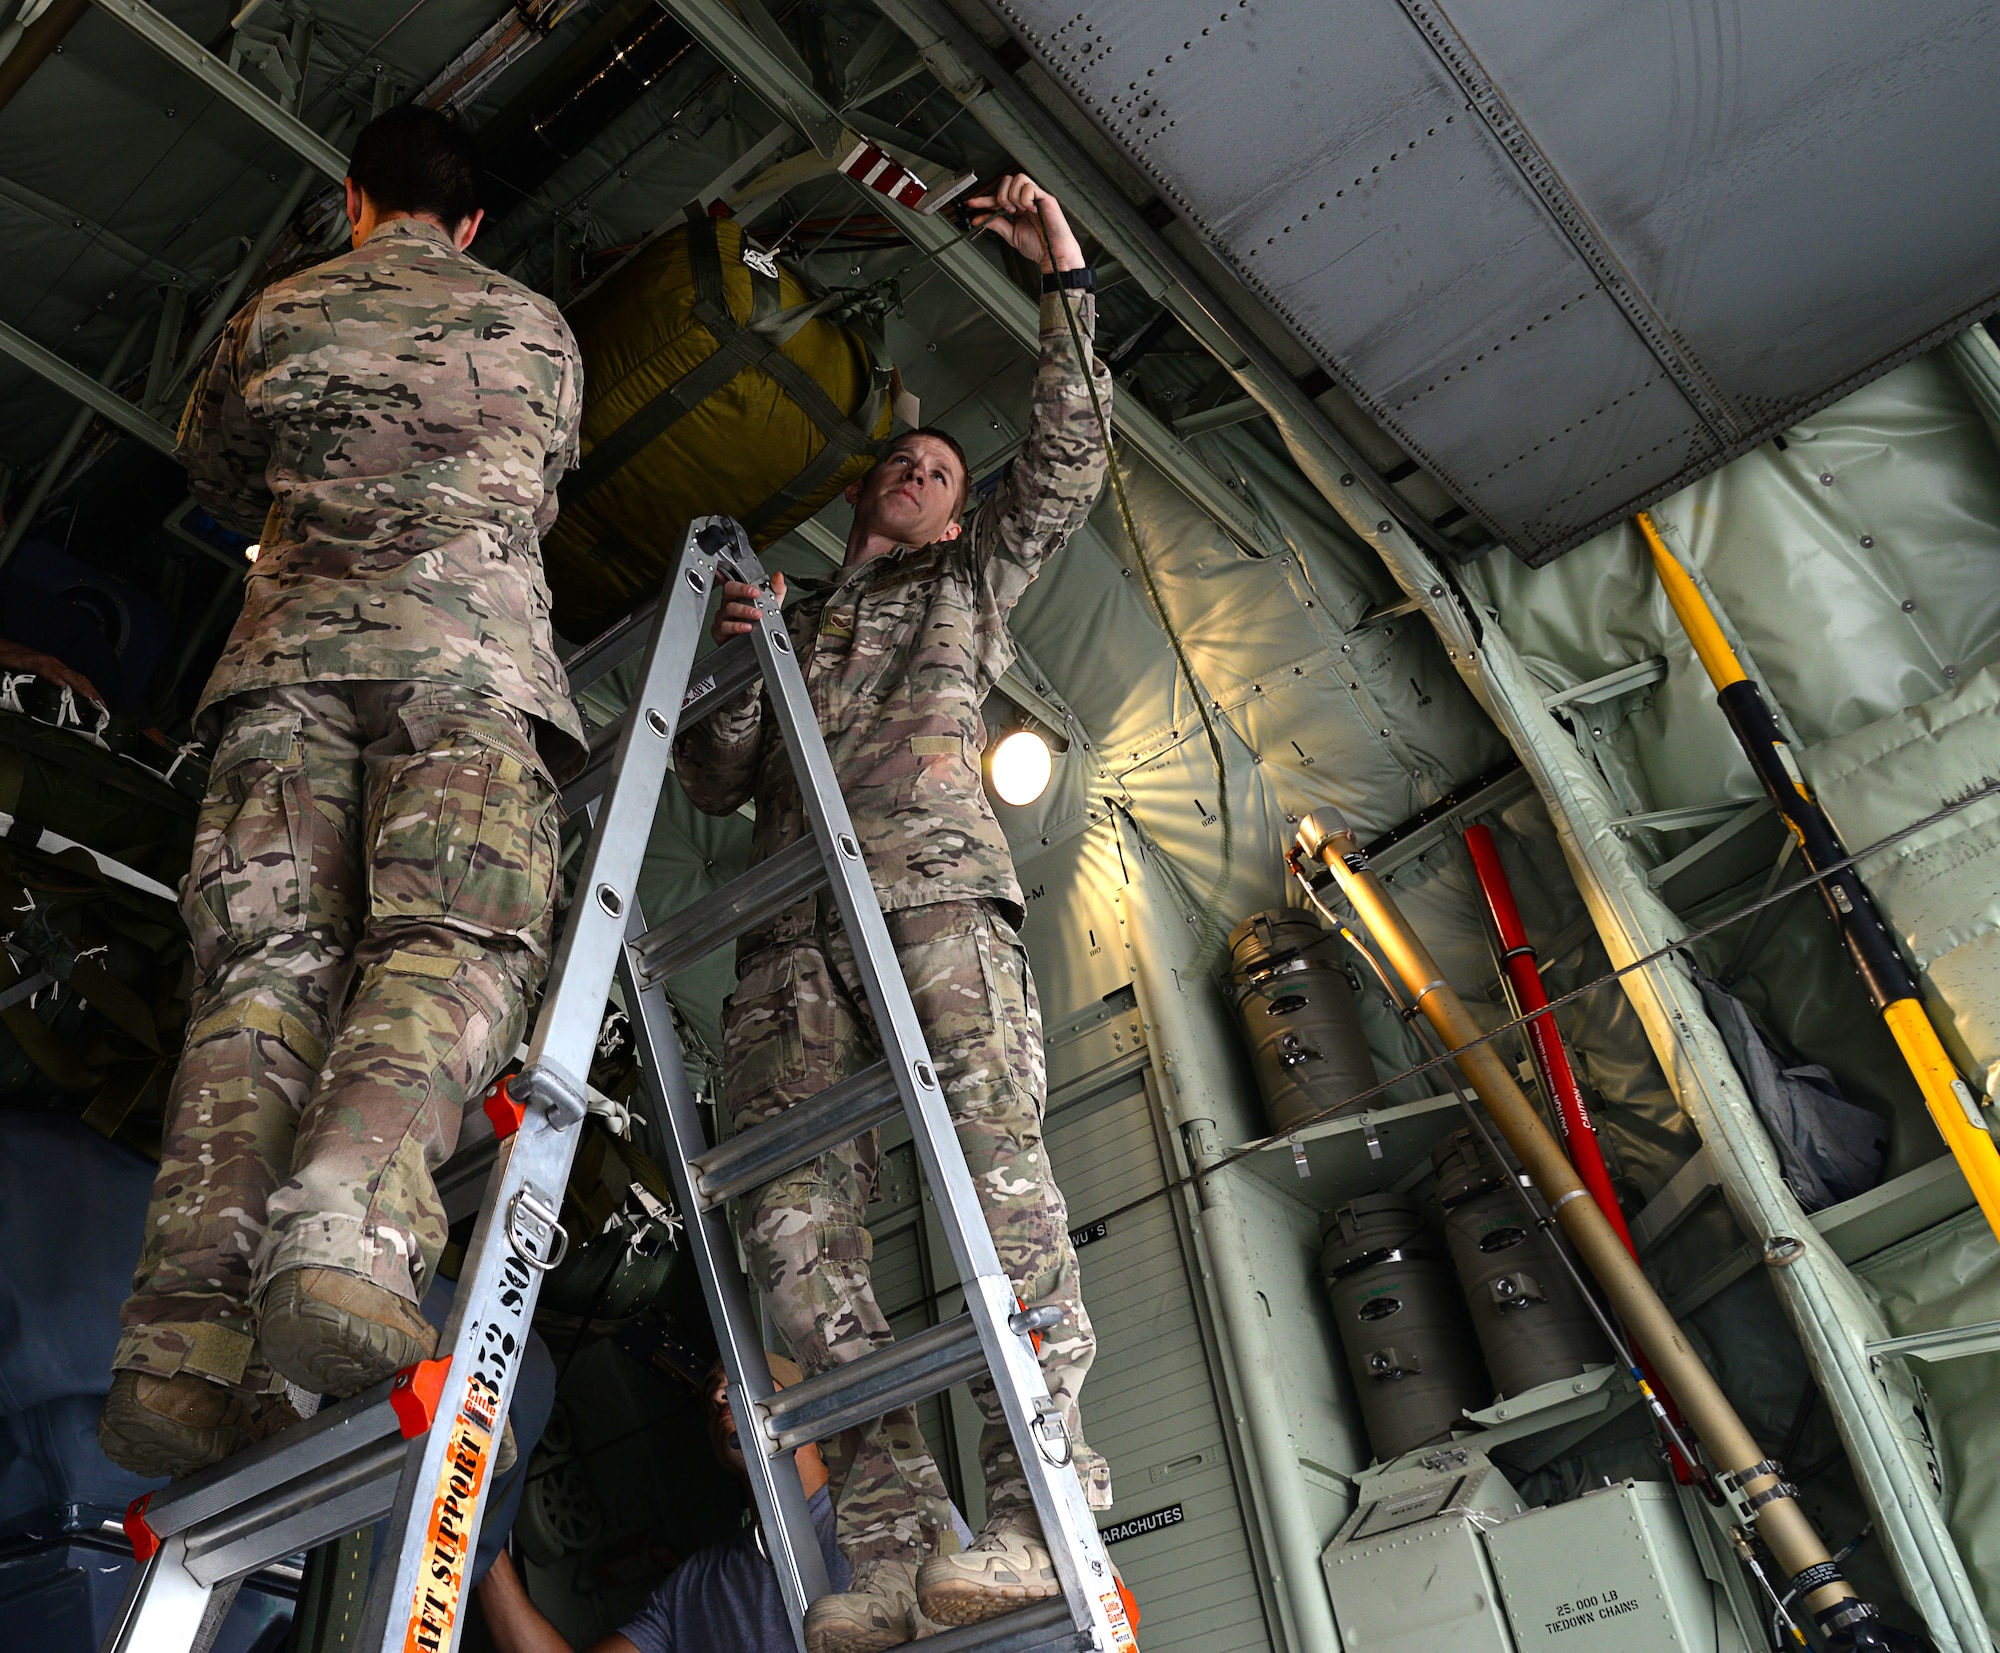 Two U.S. Air Force MC-130J Commando II loadmasters, assigned to the 67th Special Operations Squadron attach a parachute attached to a Rigid Inflatable Boat Sept. 26, 2016, at Stuttgart Air Base, Germany. The aircraft is fitted and inspected in preparation for a Maritime Craft Aerial Delivery drop in participation with the 2016 Night Hawk exercise. (U.S. Air Force photo by Senior Airman Justine Rho)